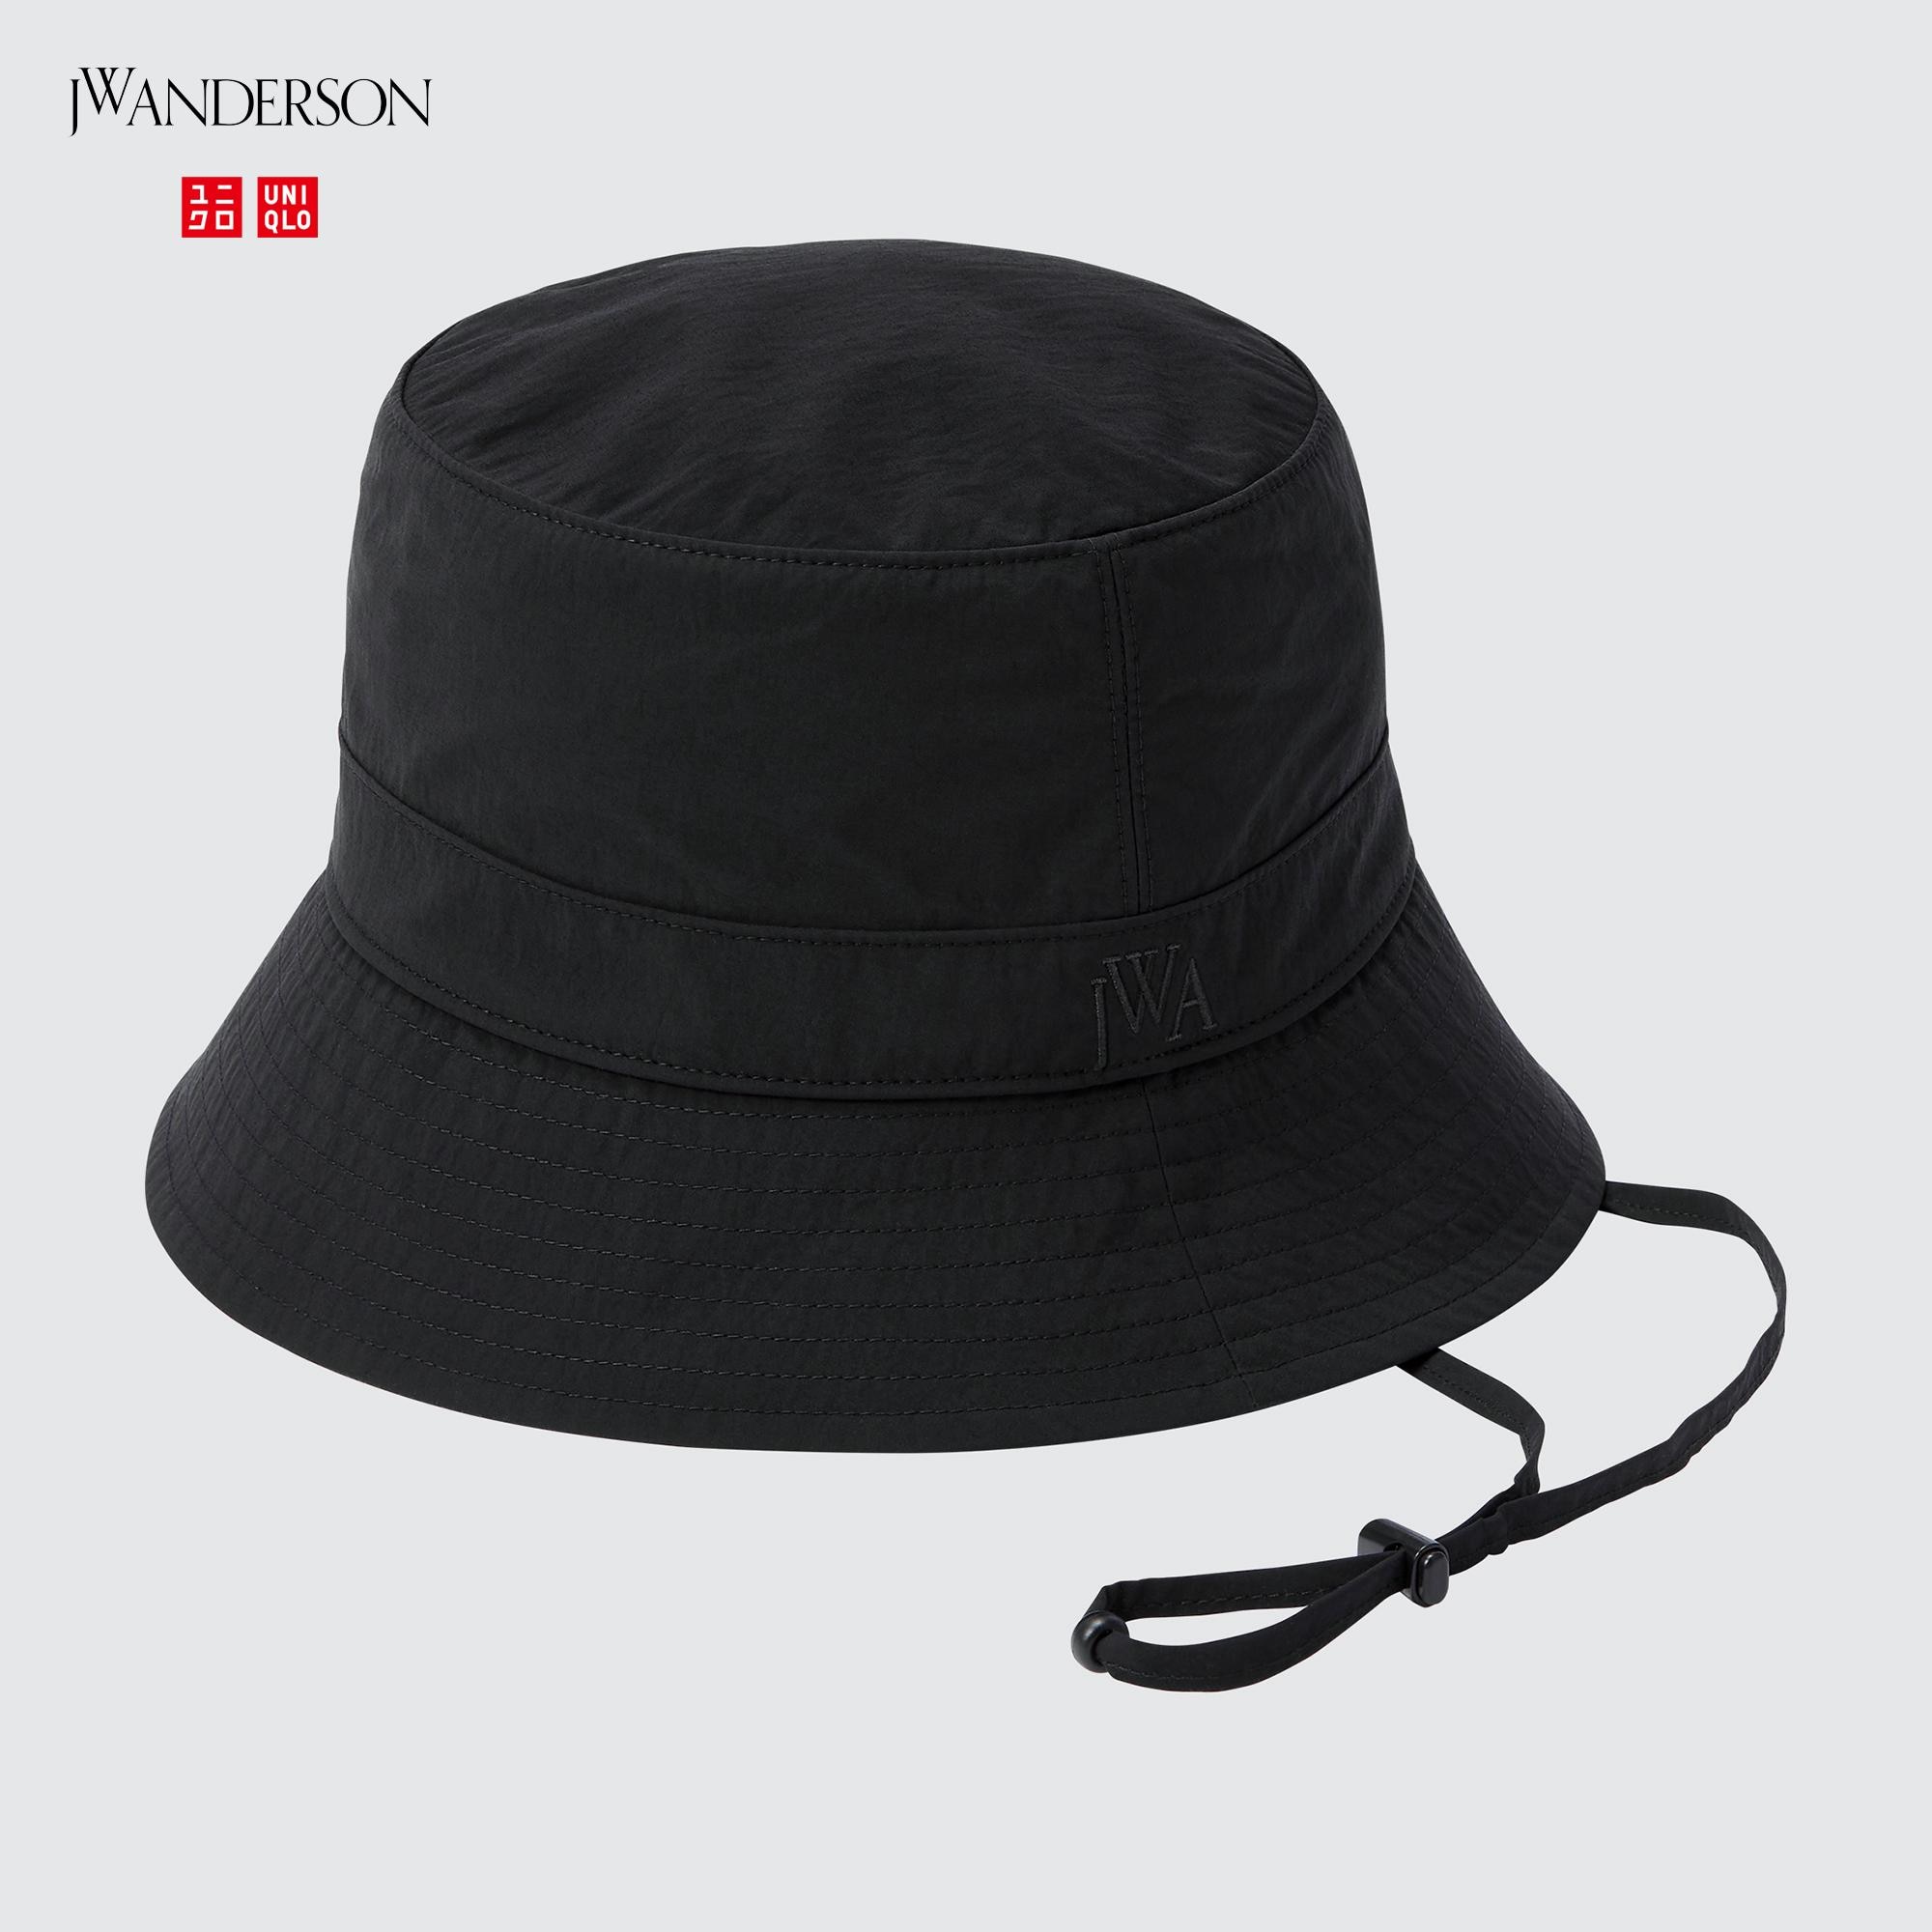 jw Anderson バケットバッグ 黒 美品